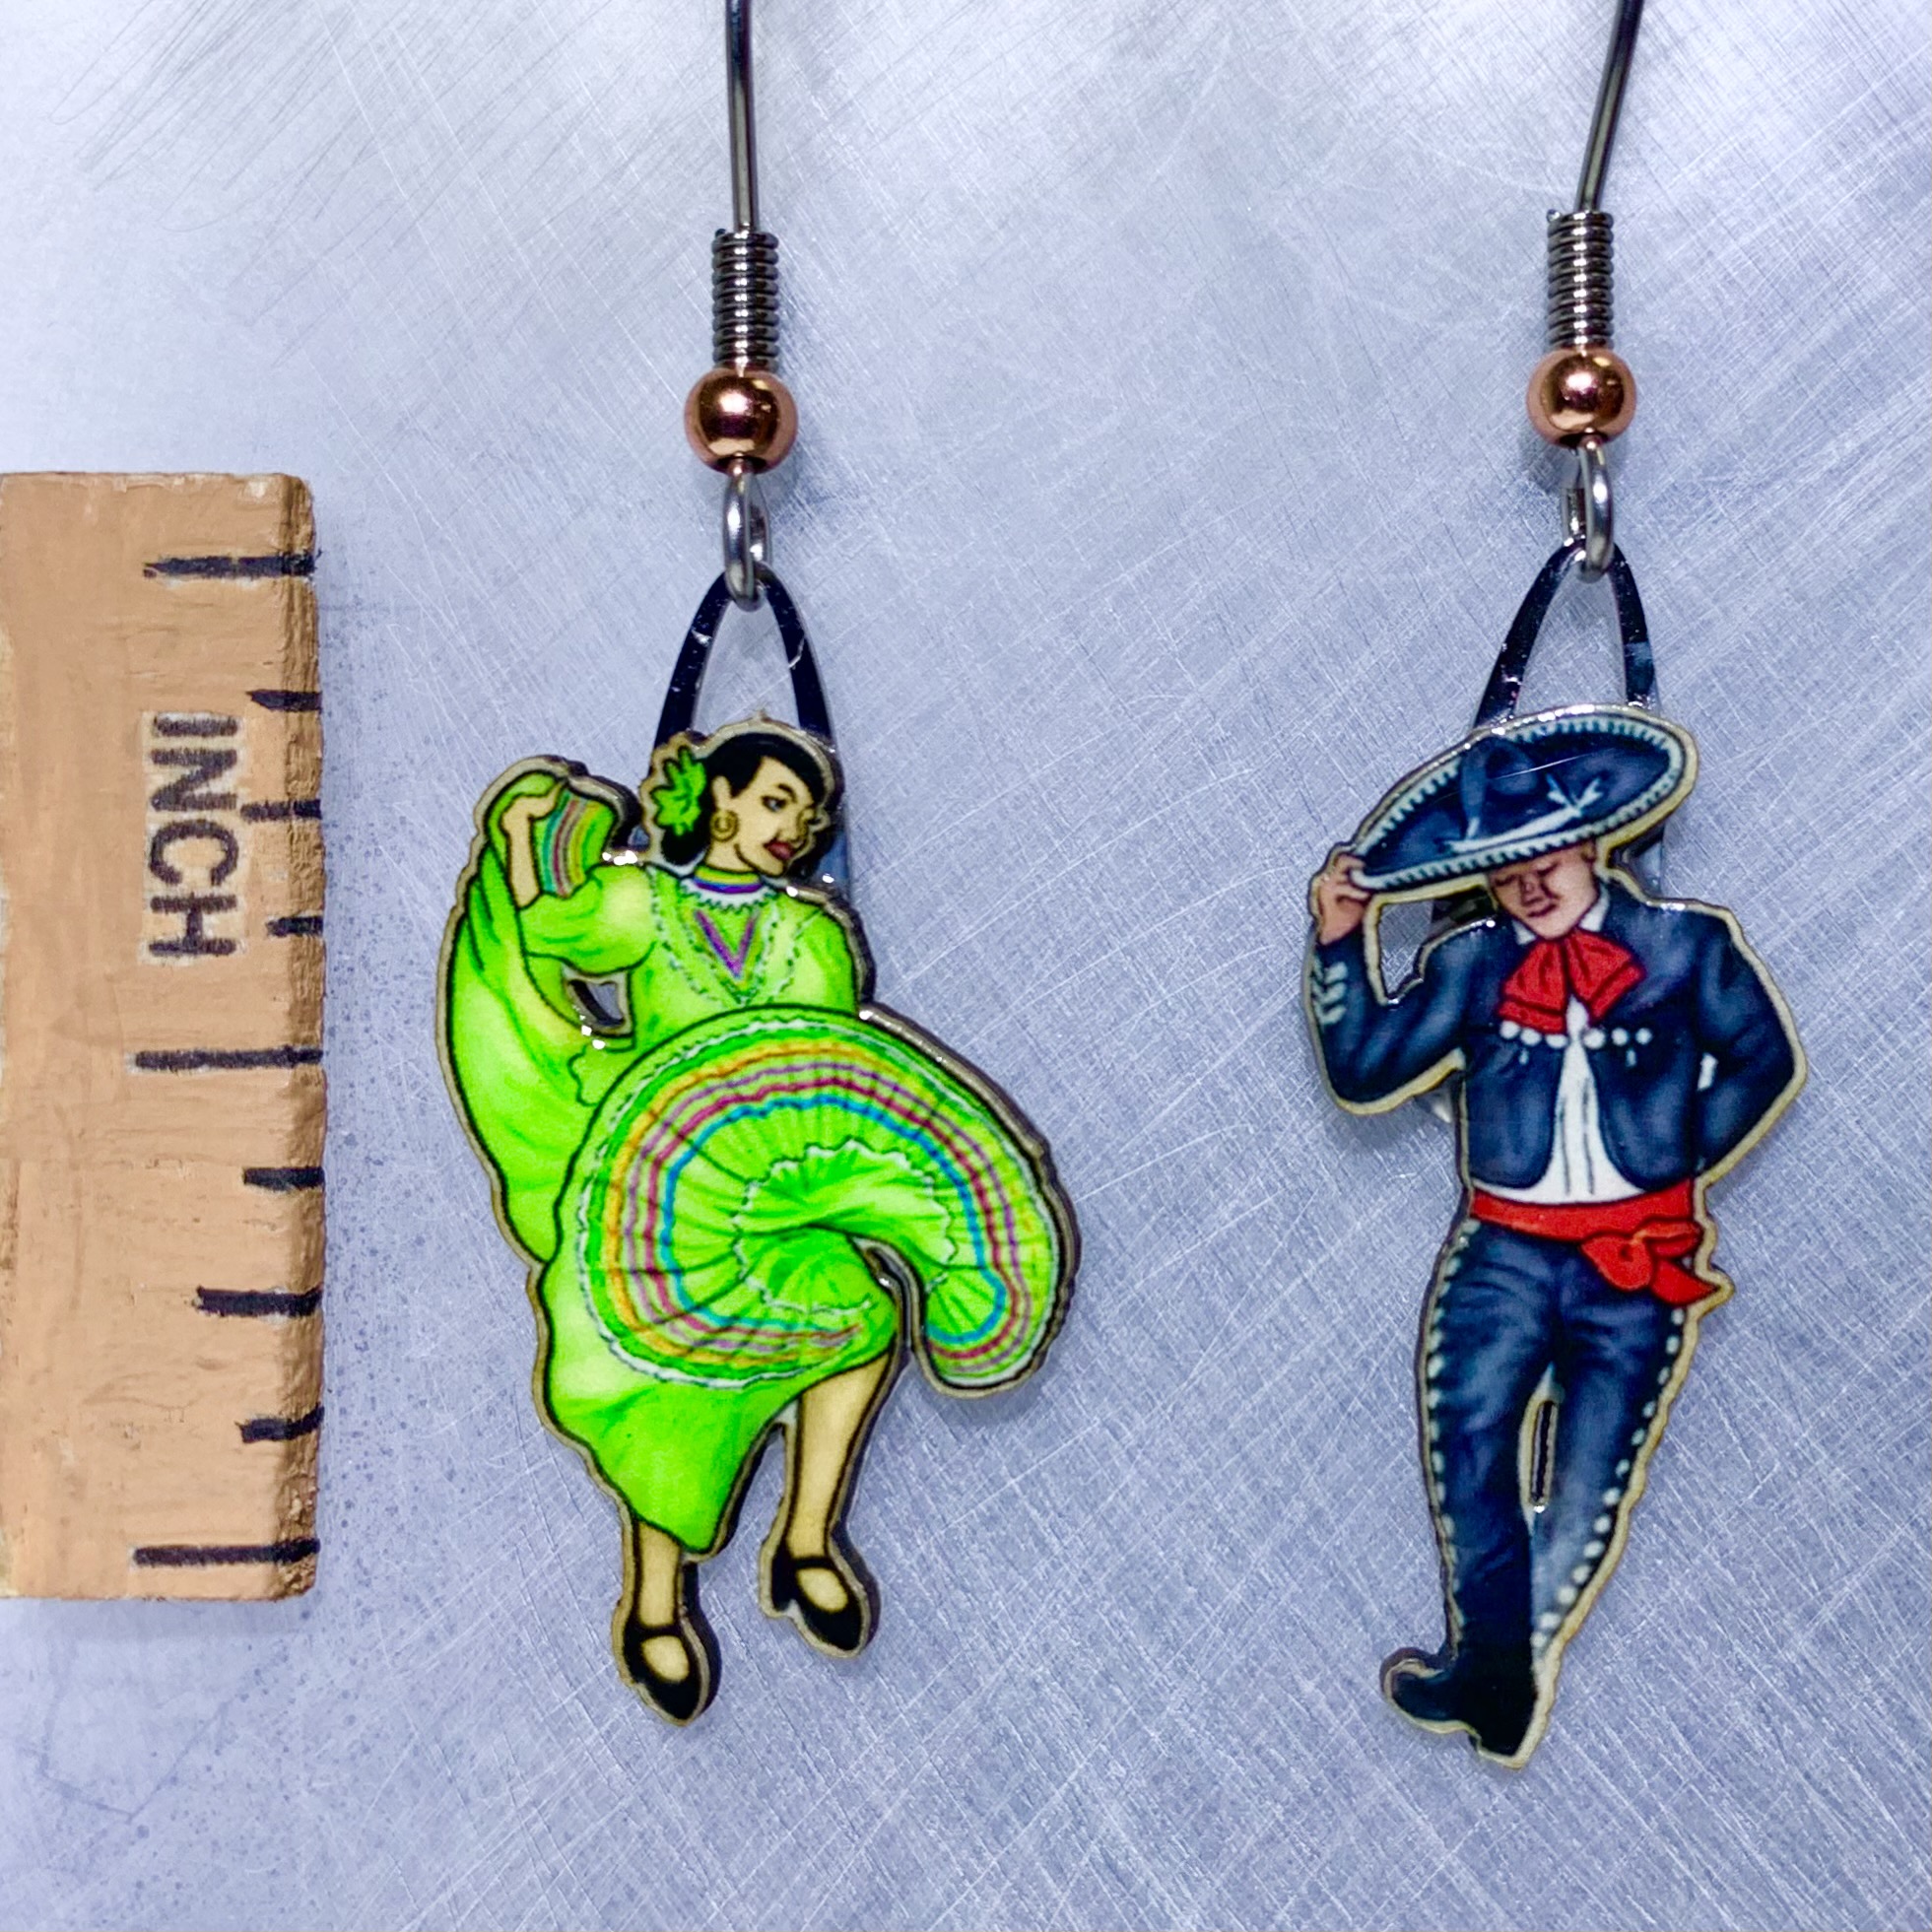 Picture shown is of 1 inch tall pair of earrings of Green Folklorico.